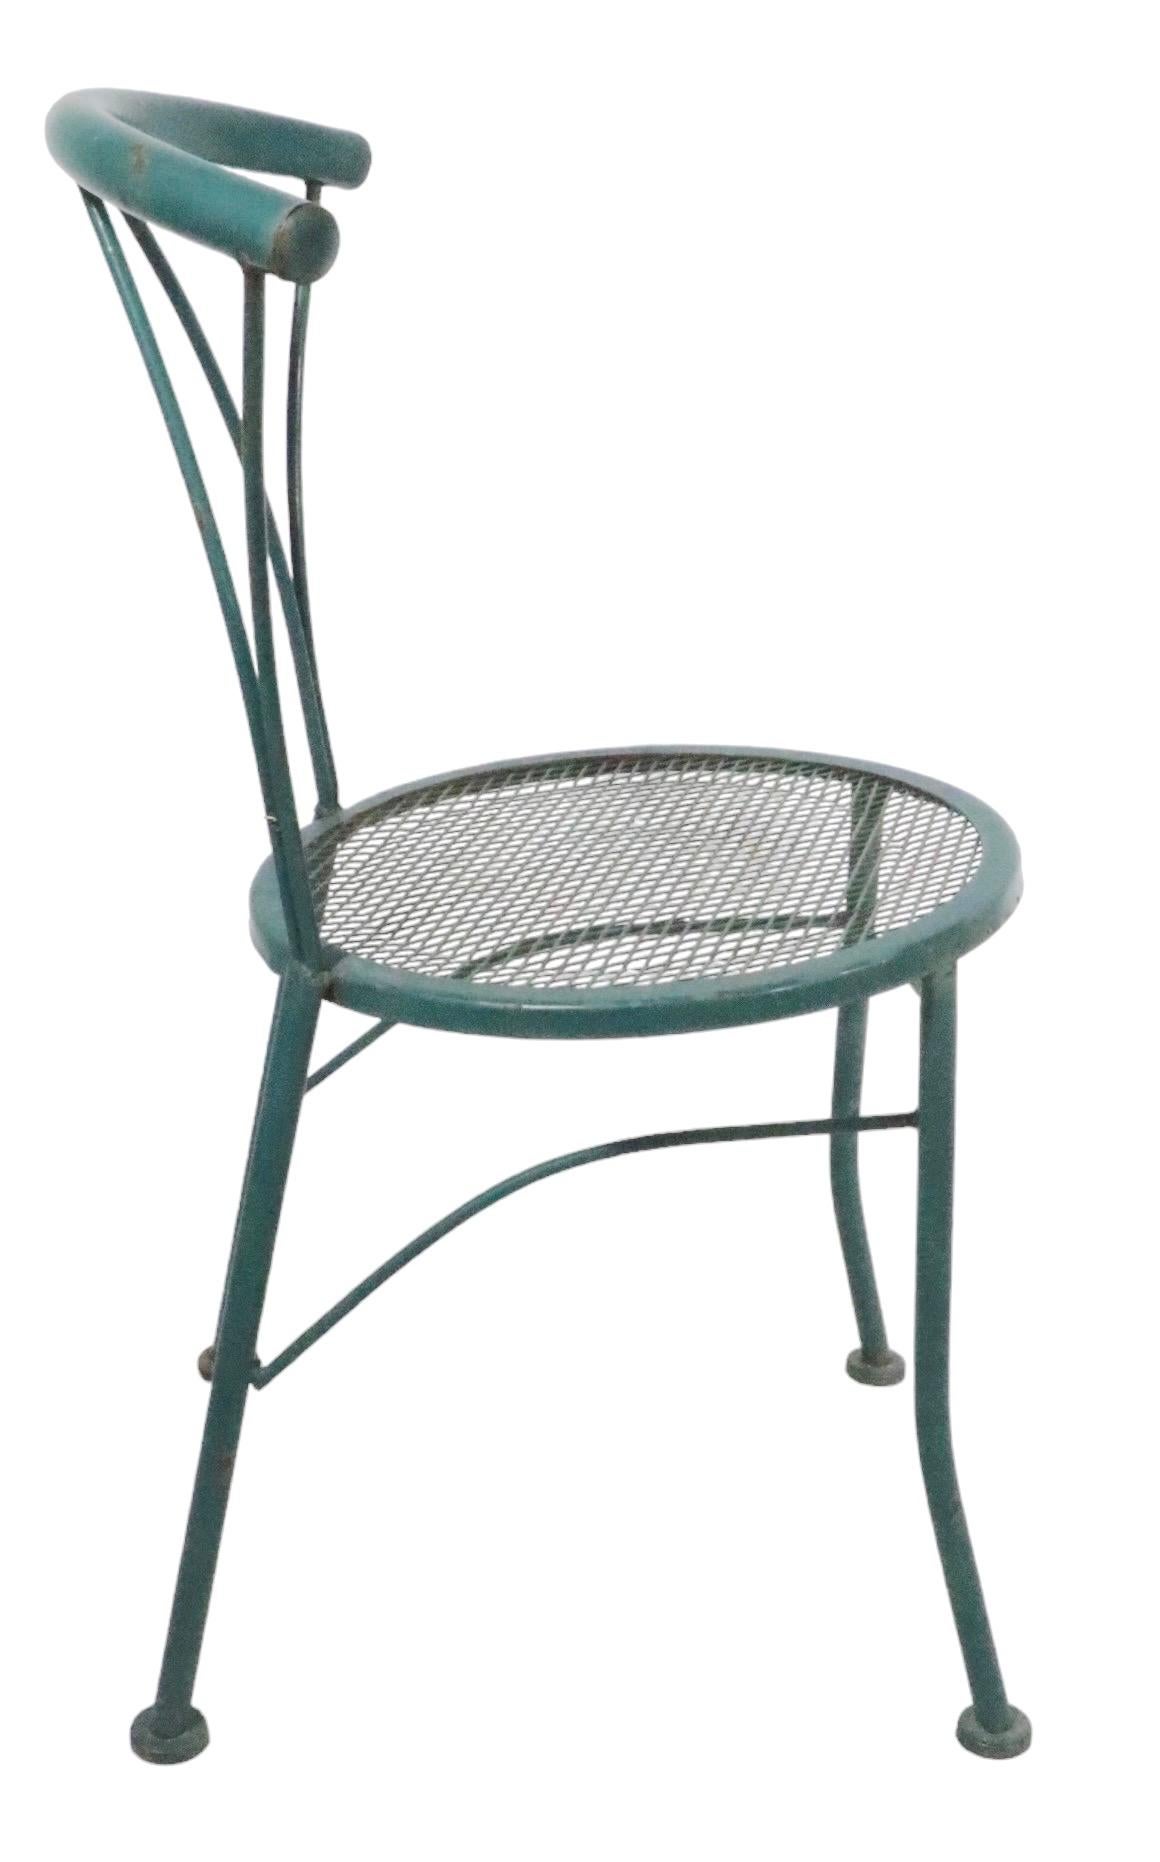 Pr. Wrought Iron and Metal Mesh Garden Patio Poolside Bistro Cafe  Dining Chairs For Sale 10